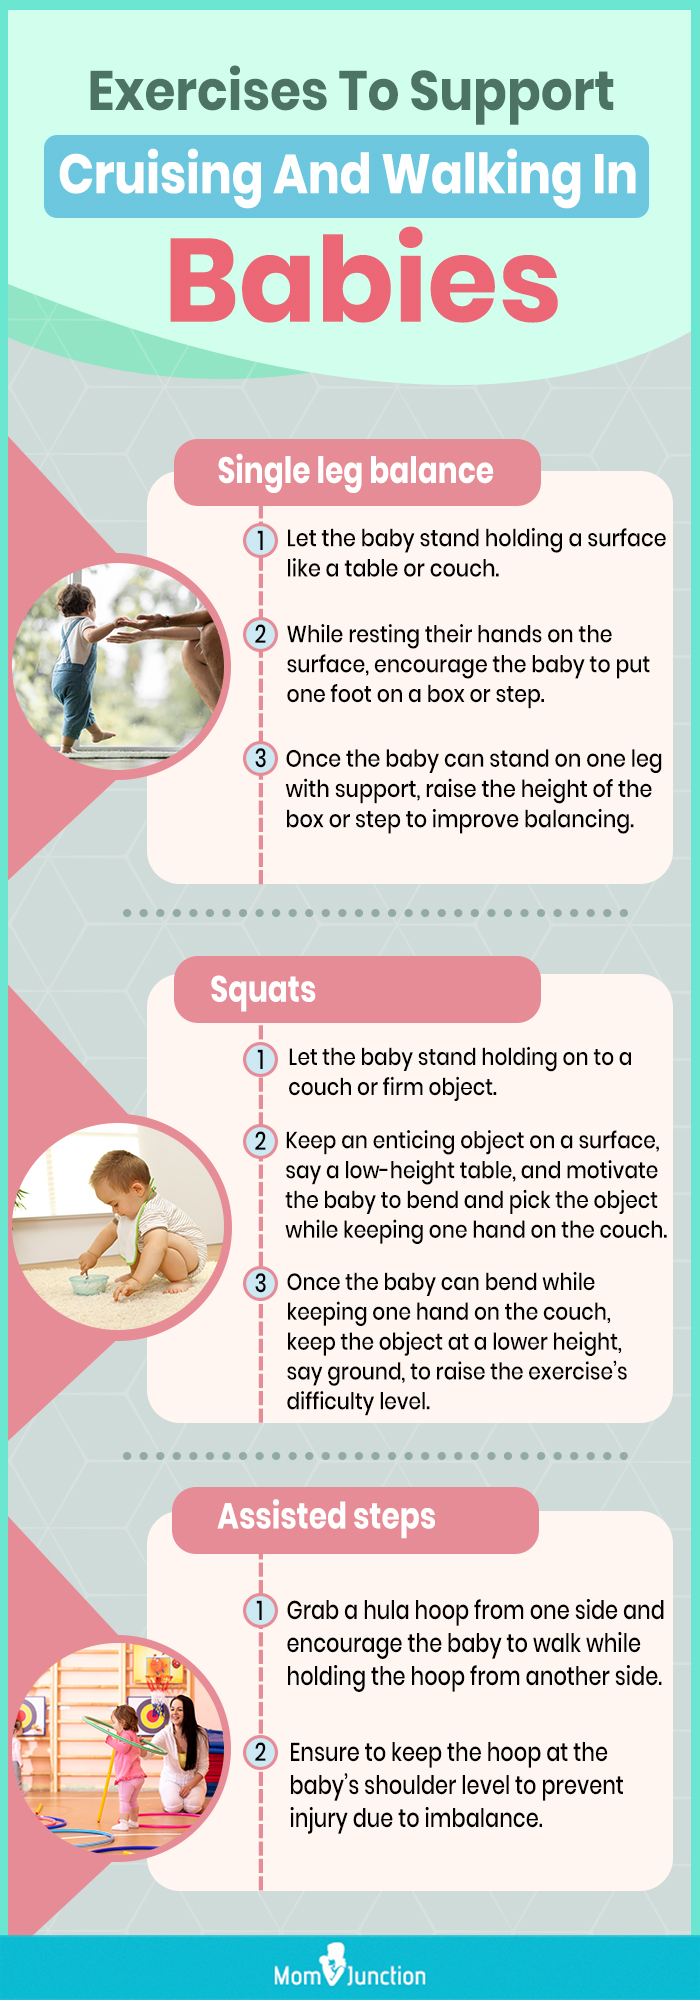 exercises to support crusing and walking in babies(infographic)